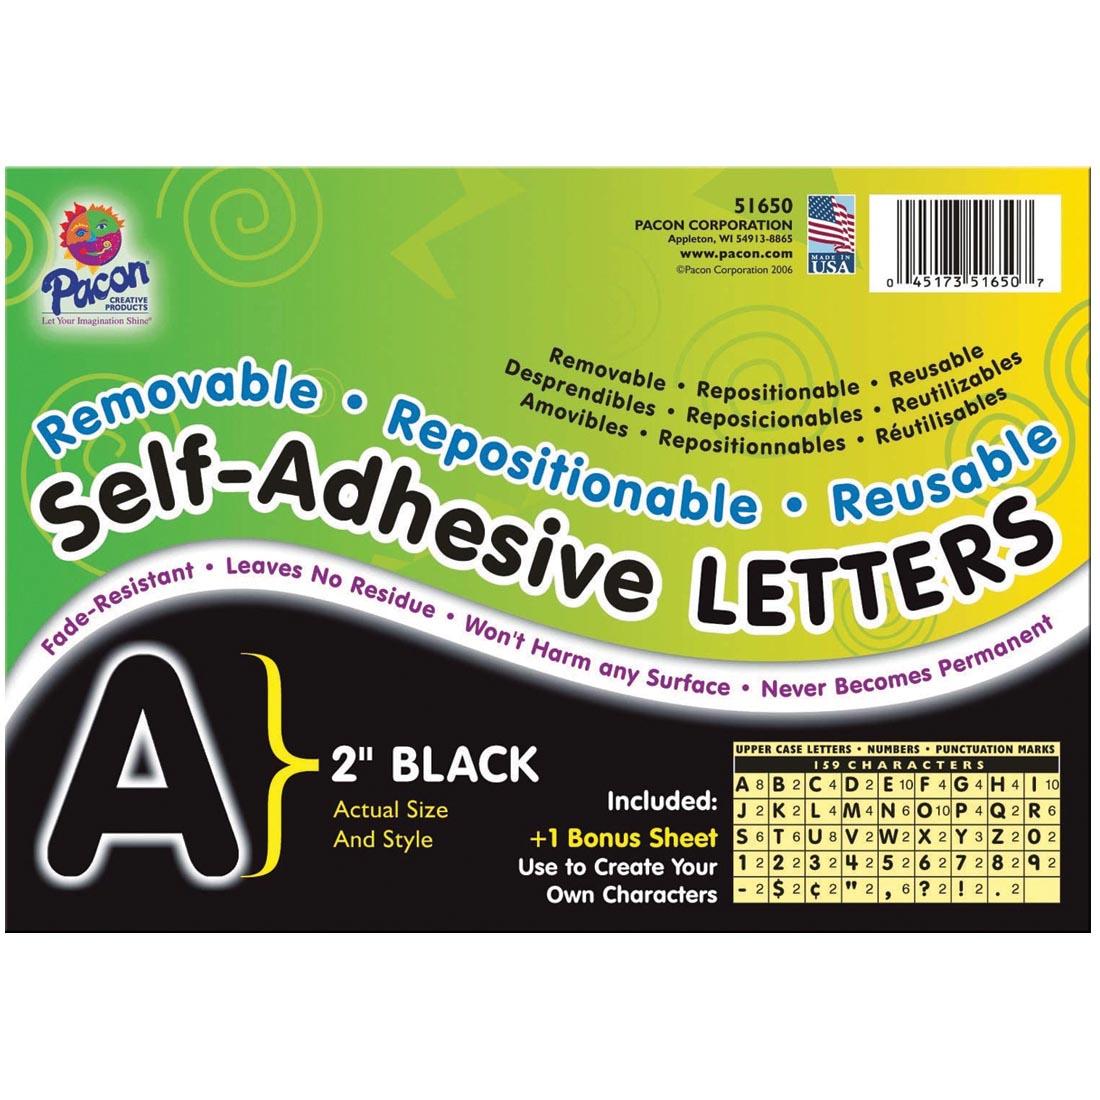 Pacon Reusable Self-Adhesive Vinyl Letters & Numbers Puffy Font 2" Black